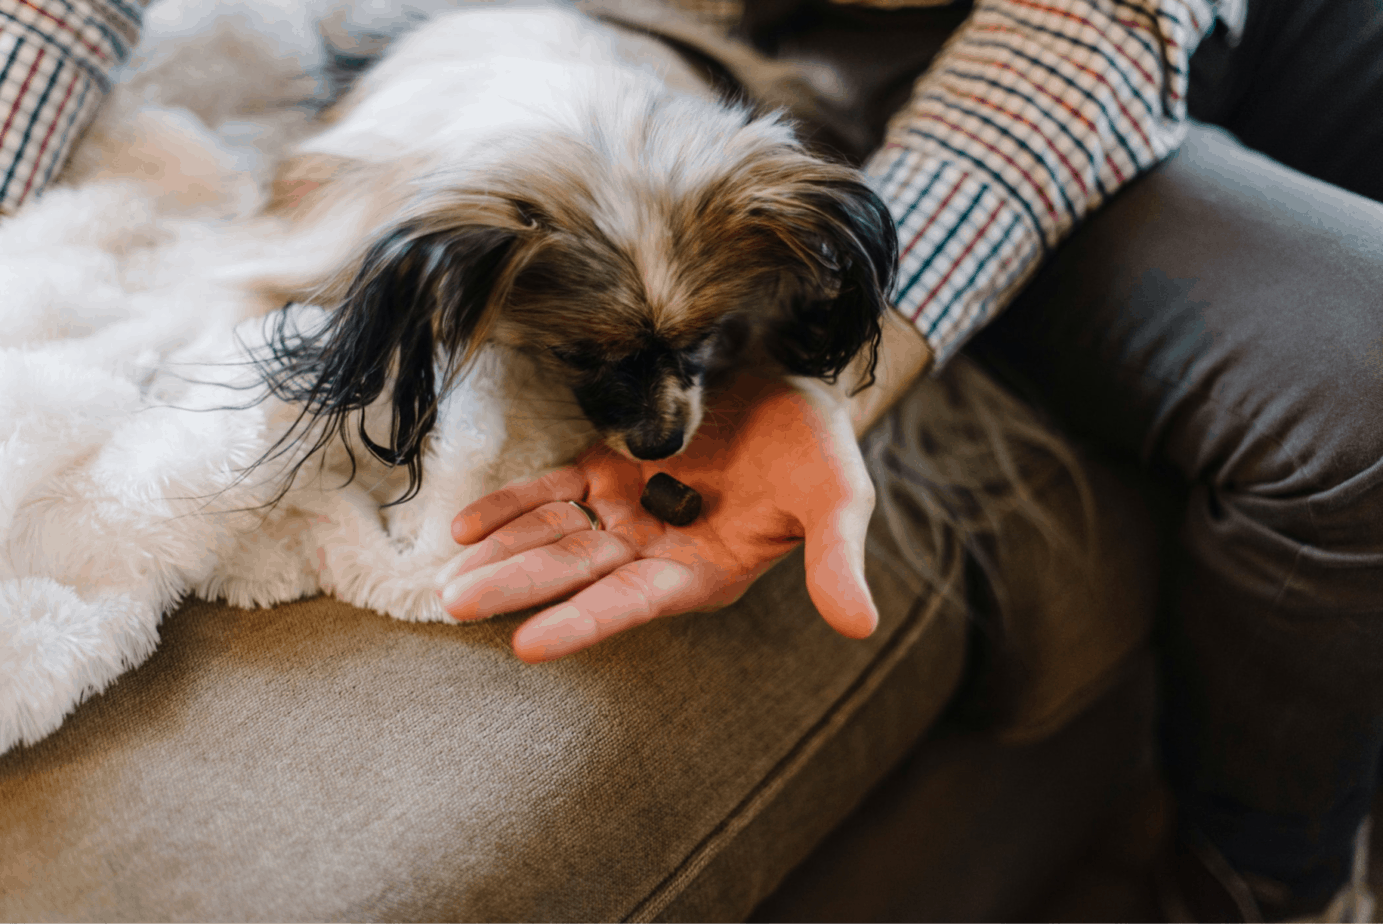 3 Reasons to Use CBD to Help Treat Your Pet